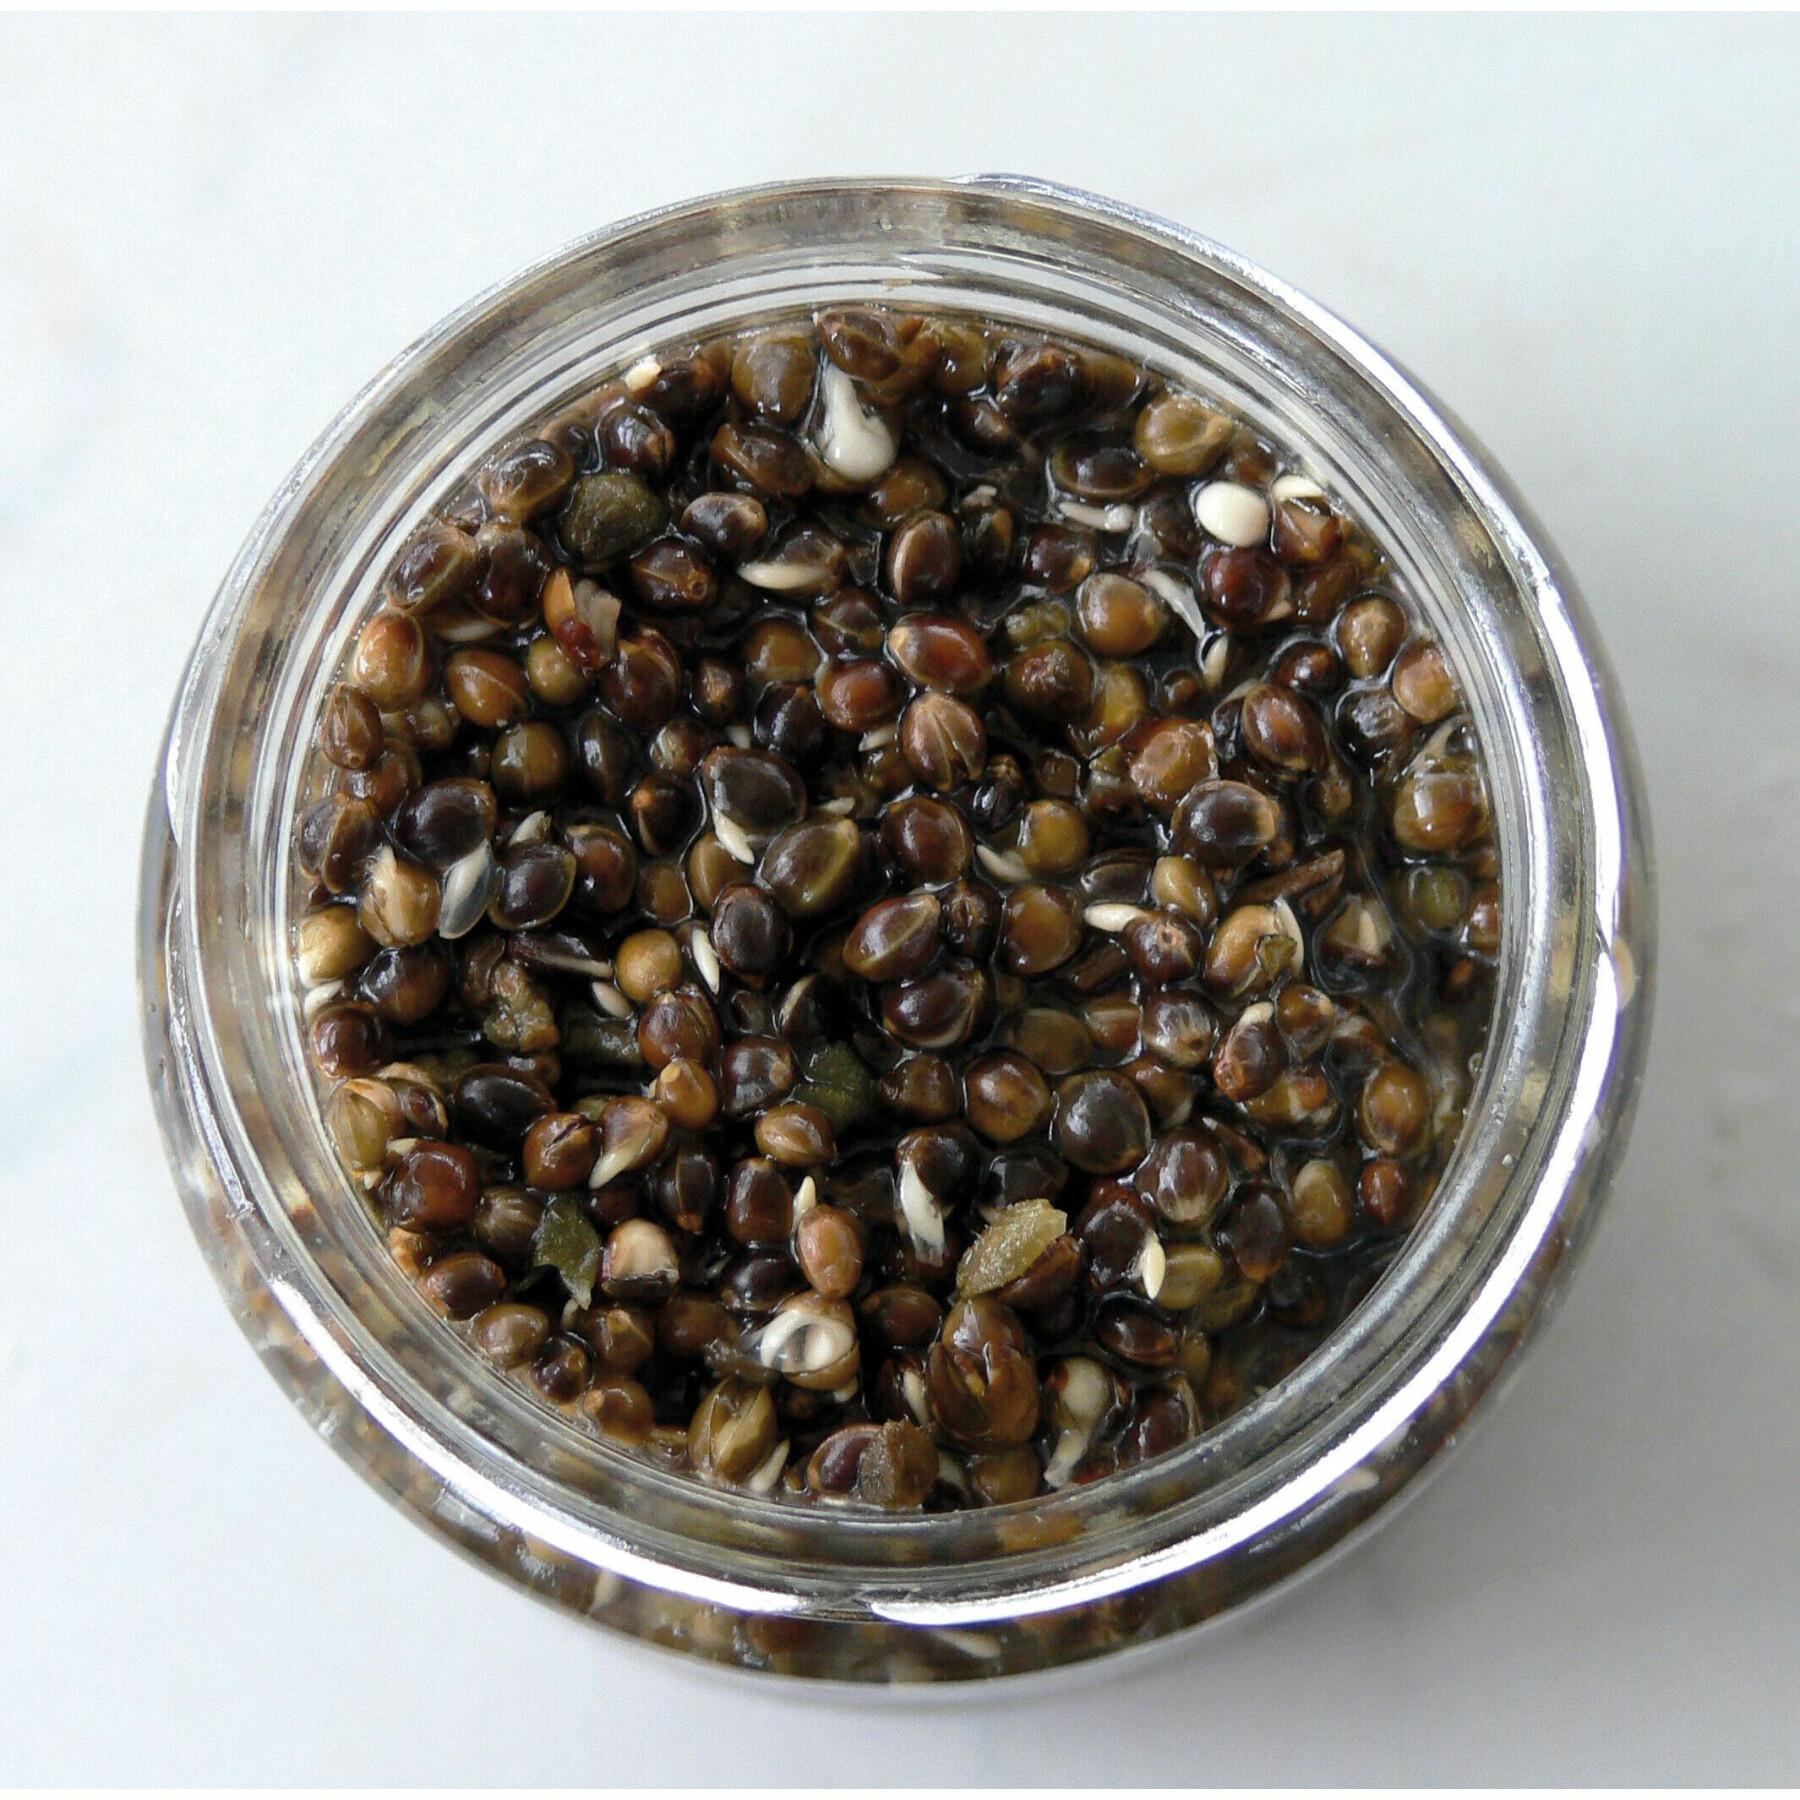 Cooked chenevis seeds Rameau 212 ml